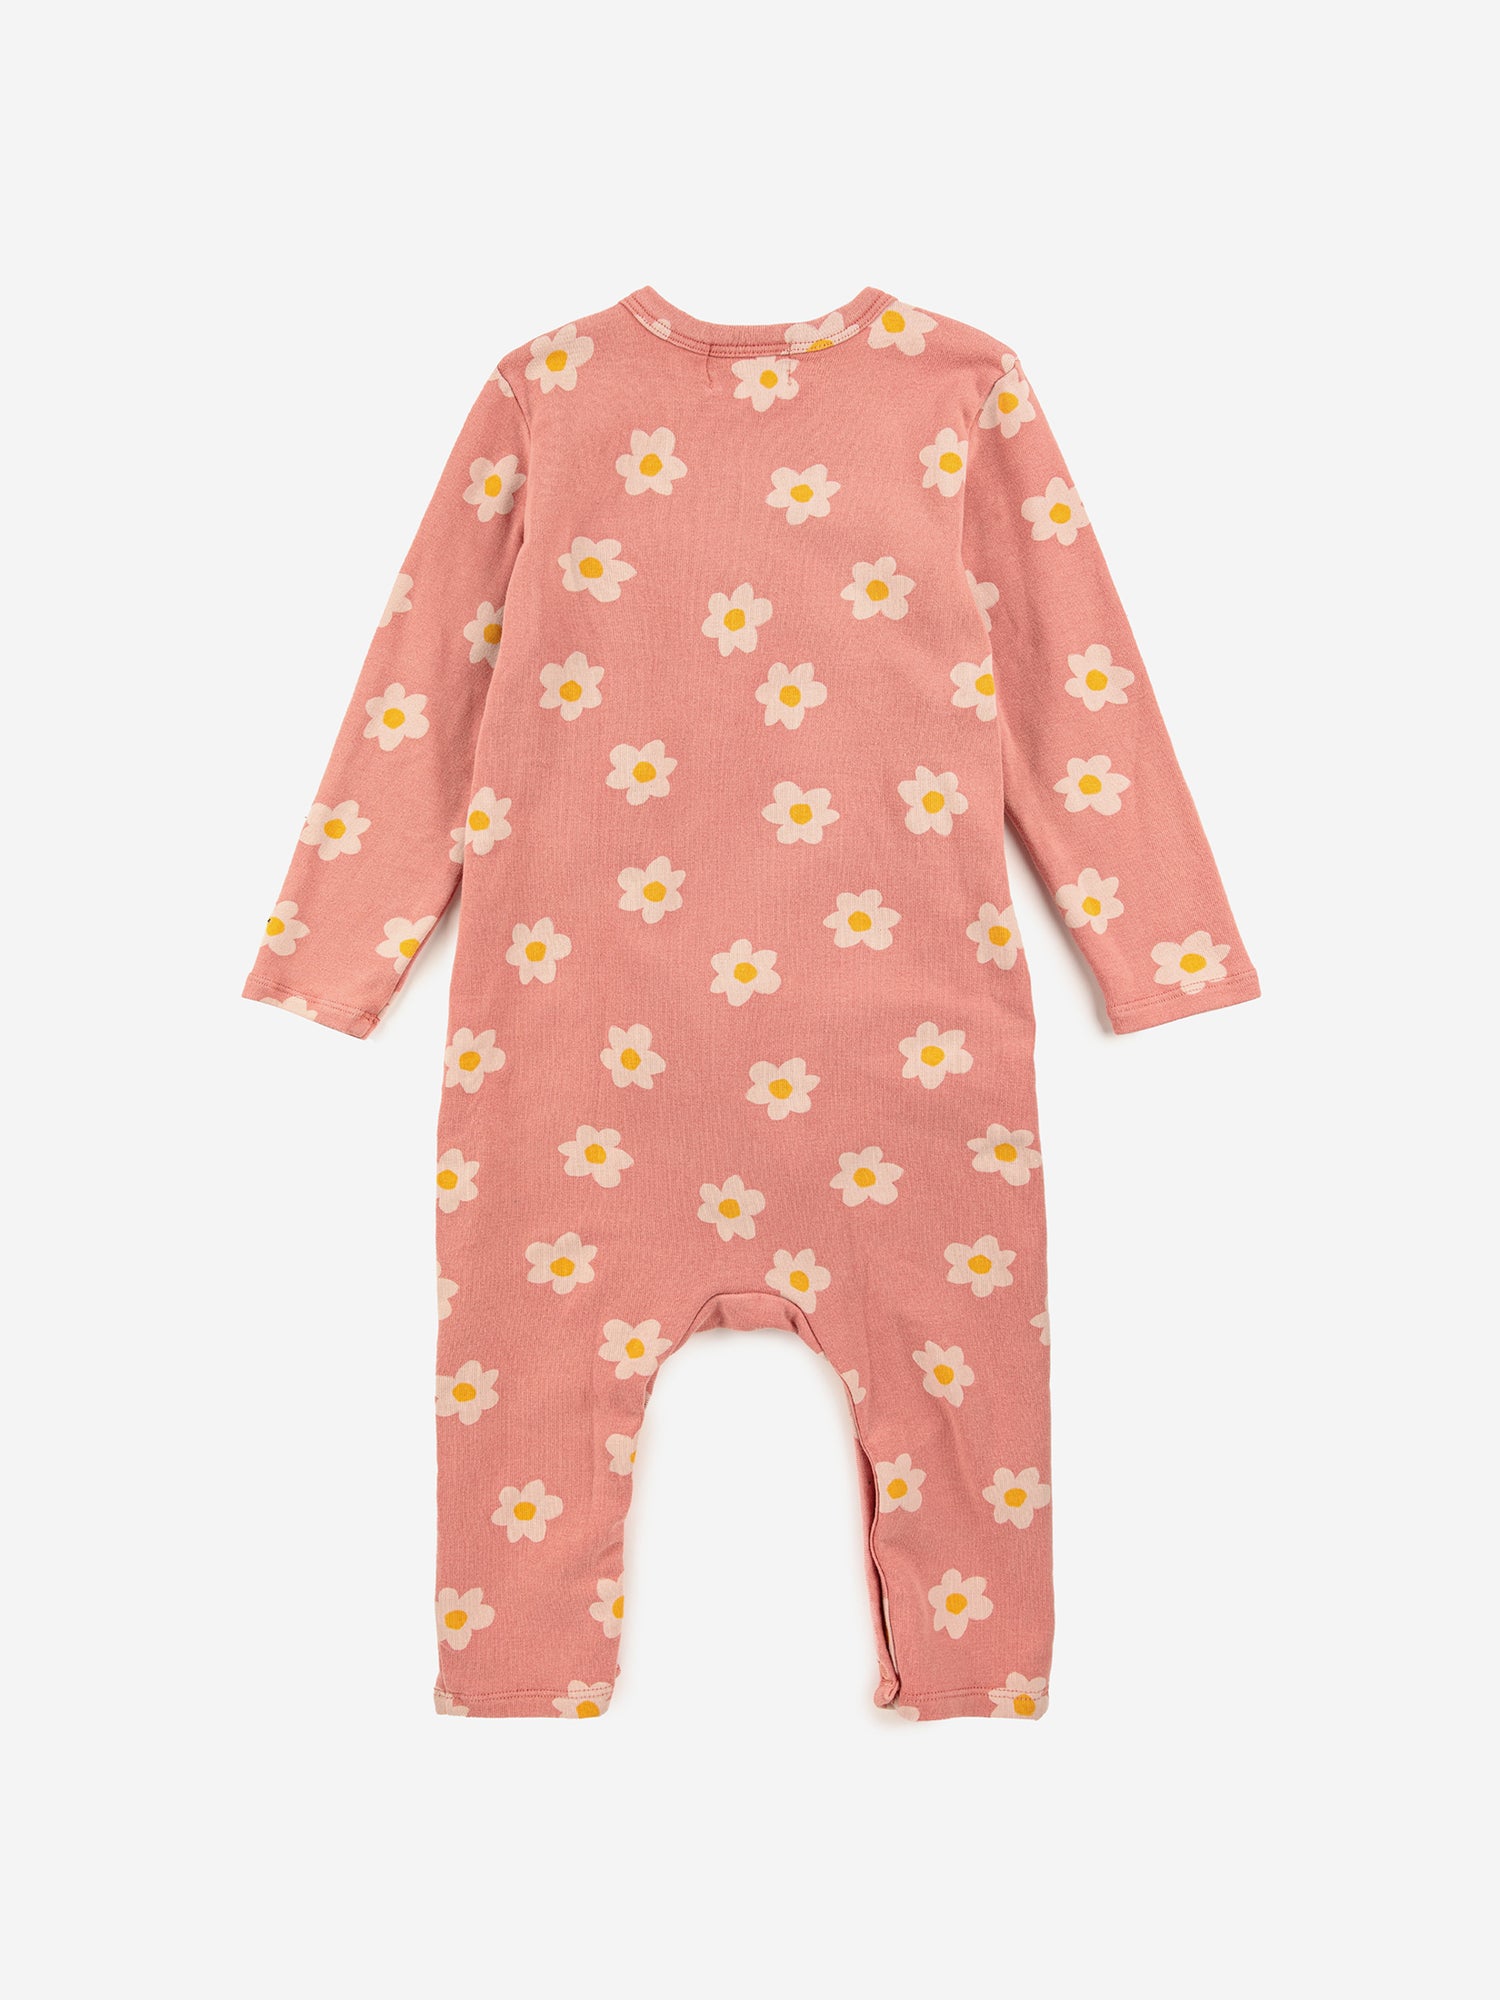 Little Flower Wrap Overall by Bobo Choses. 95% organic cotton 5% elastane pink long sleeve onesie. Designed with a wrap around which snaps down the front & crotch for easy changing. Lined with fleece. Slim fit.